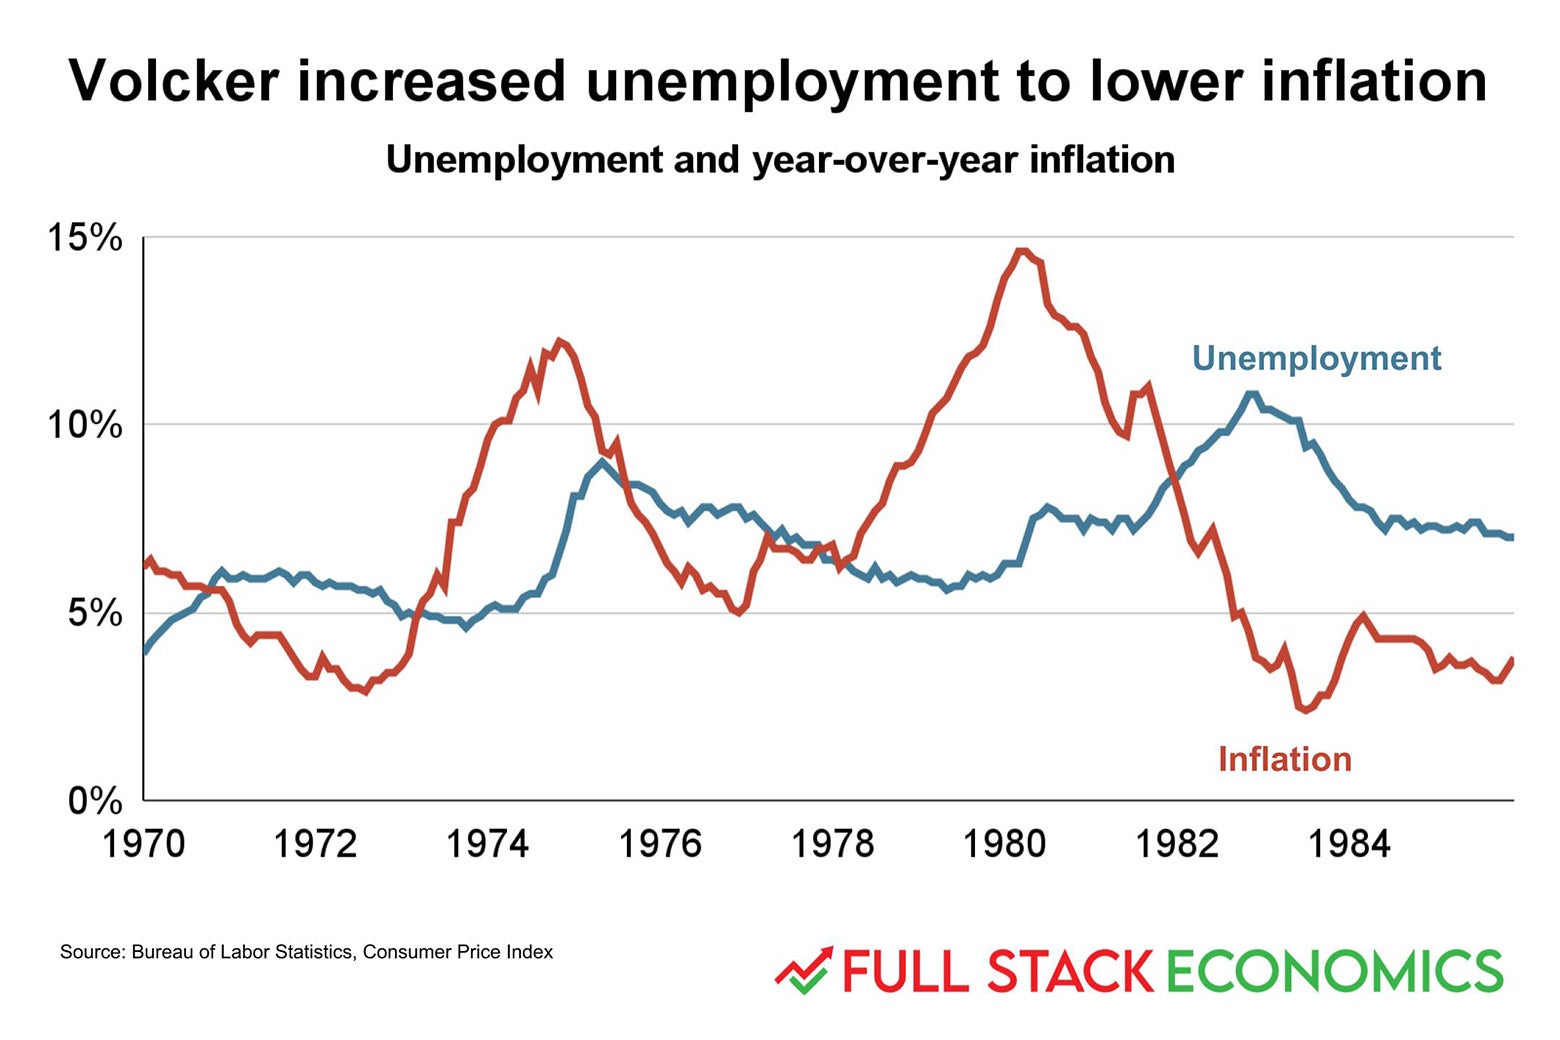 A chart showing inflation and unemployment from 1970 to 1984.